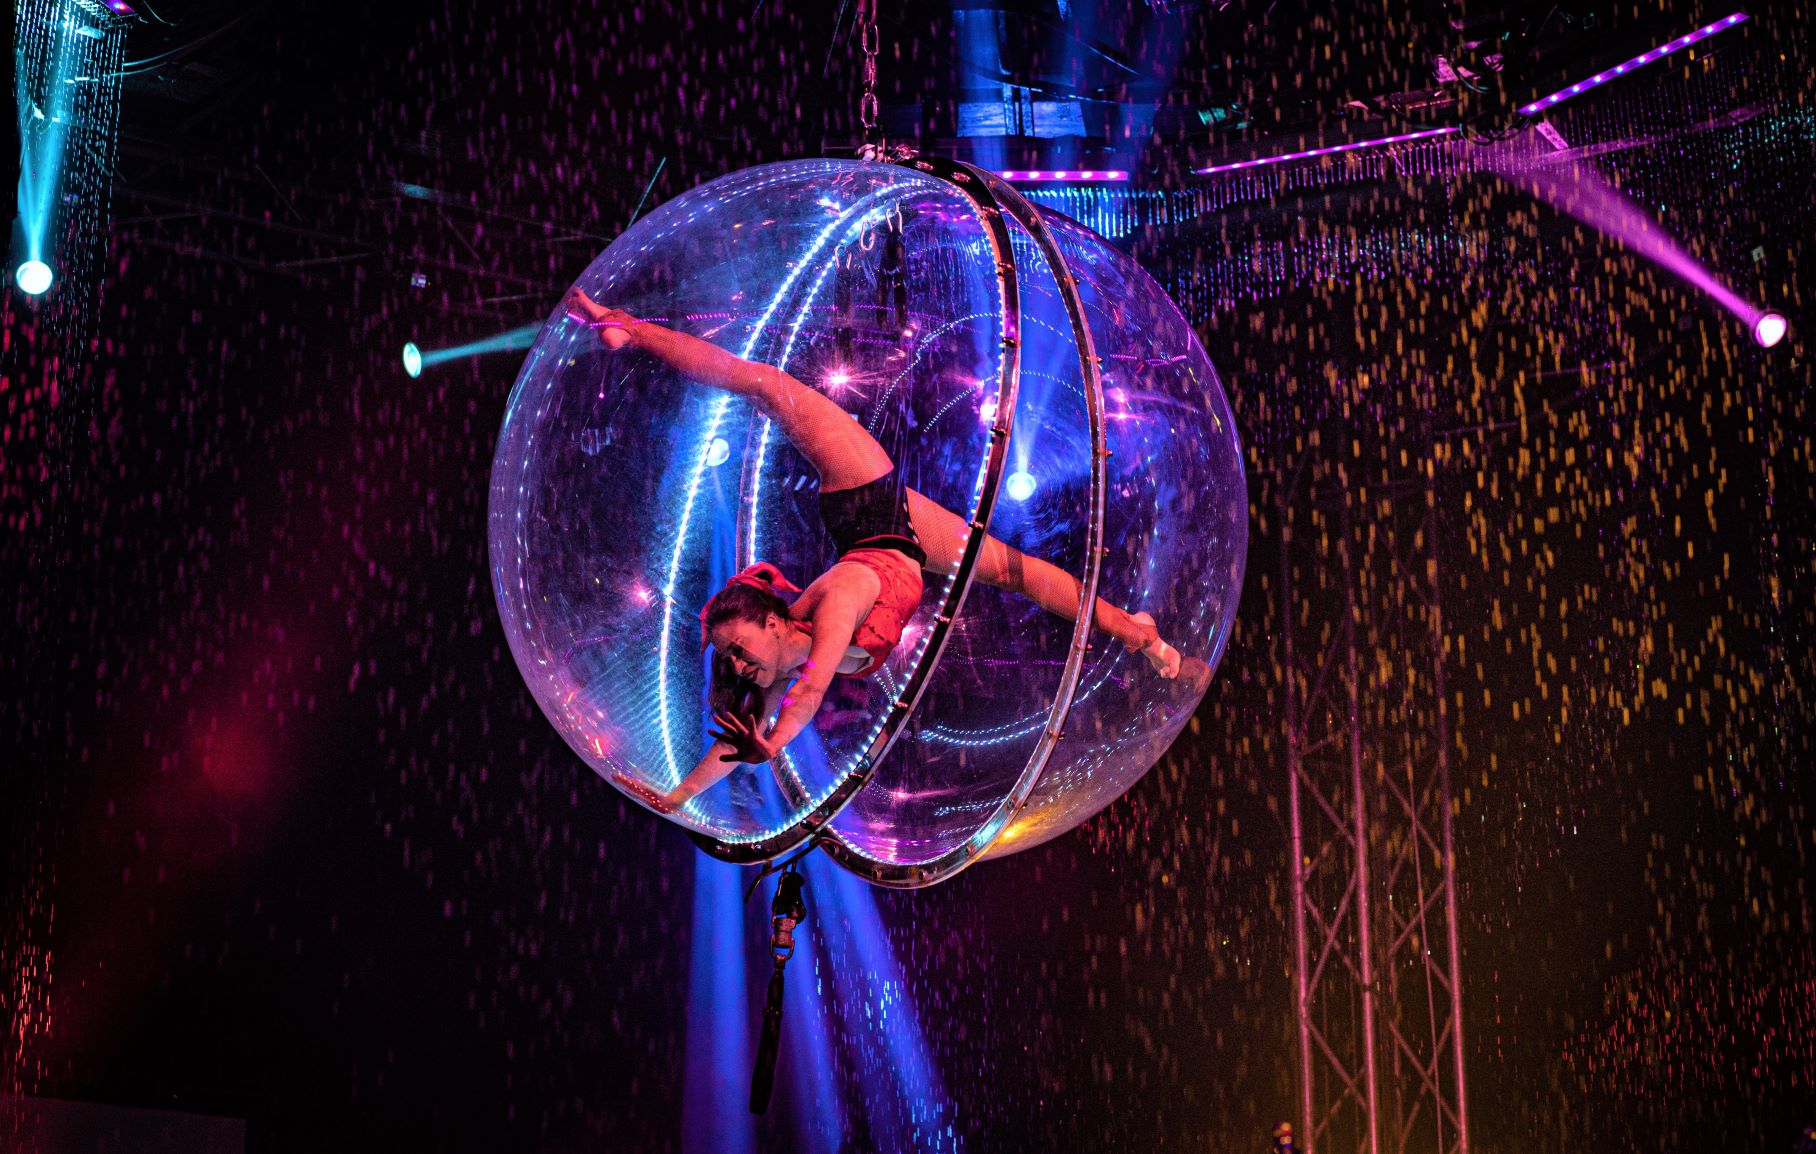 Win two tickets to the Cirque Italia show